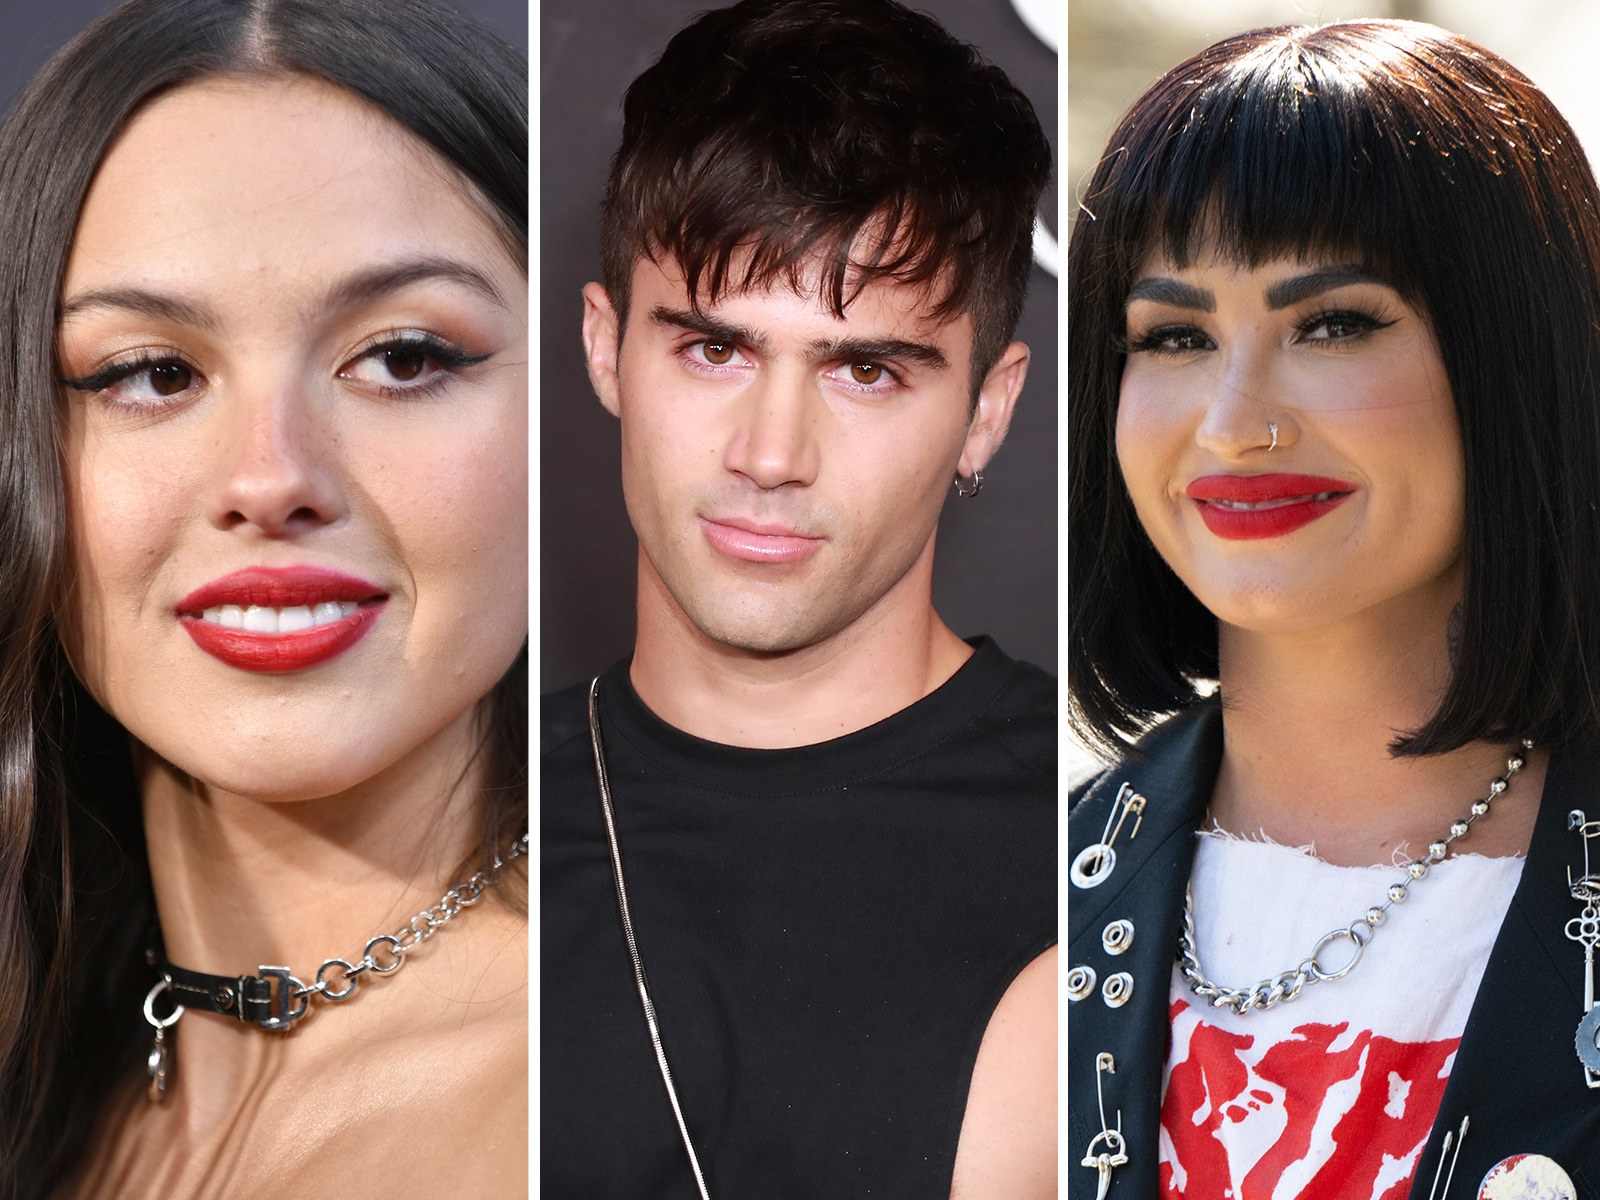 Demi Lovato's Ex Max Ehrich Appears to Shoot His Shot With Olivia